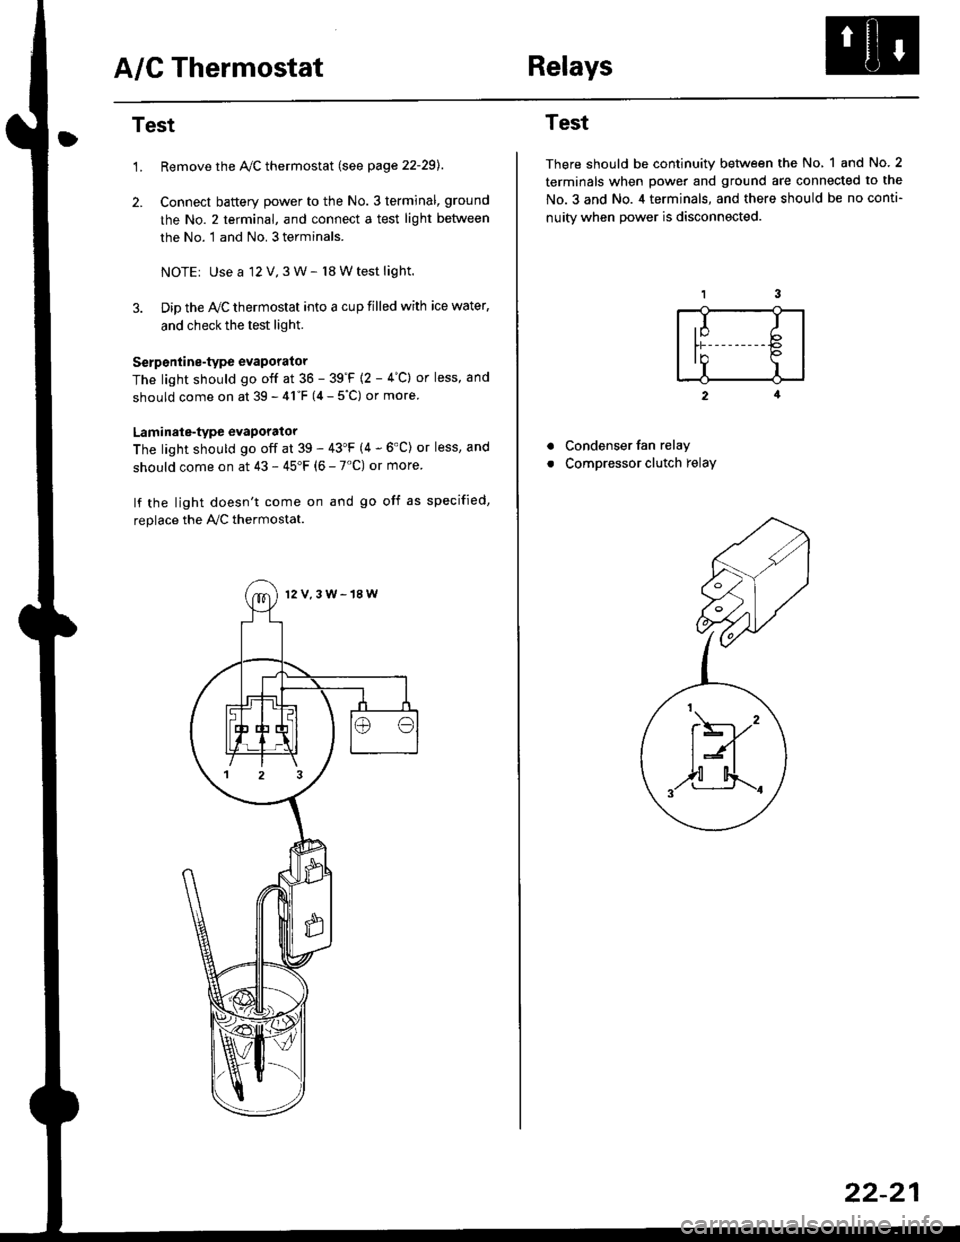 HONDA CIVIC 1996 6.G Workshop Manual A/C ThermostatRelays
Test
1.Remove the AyC thermostat (see page 22-29).
Connect baftery power to the No. 3 terminal, ground
the No. 2 terminal, and connect a test light between
the No. 1 and No. 3 te